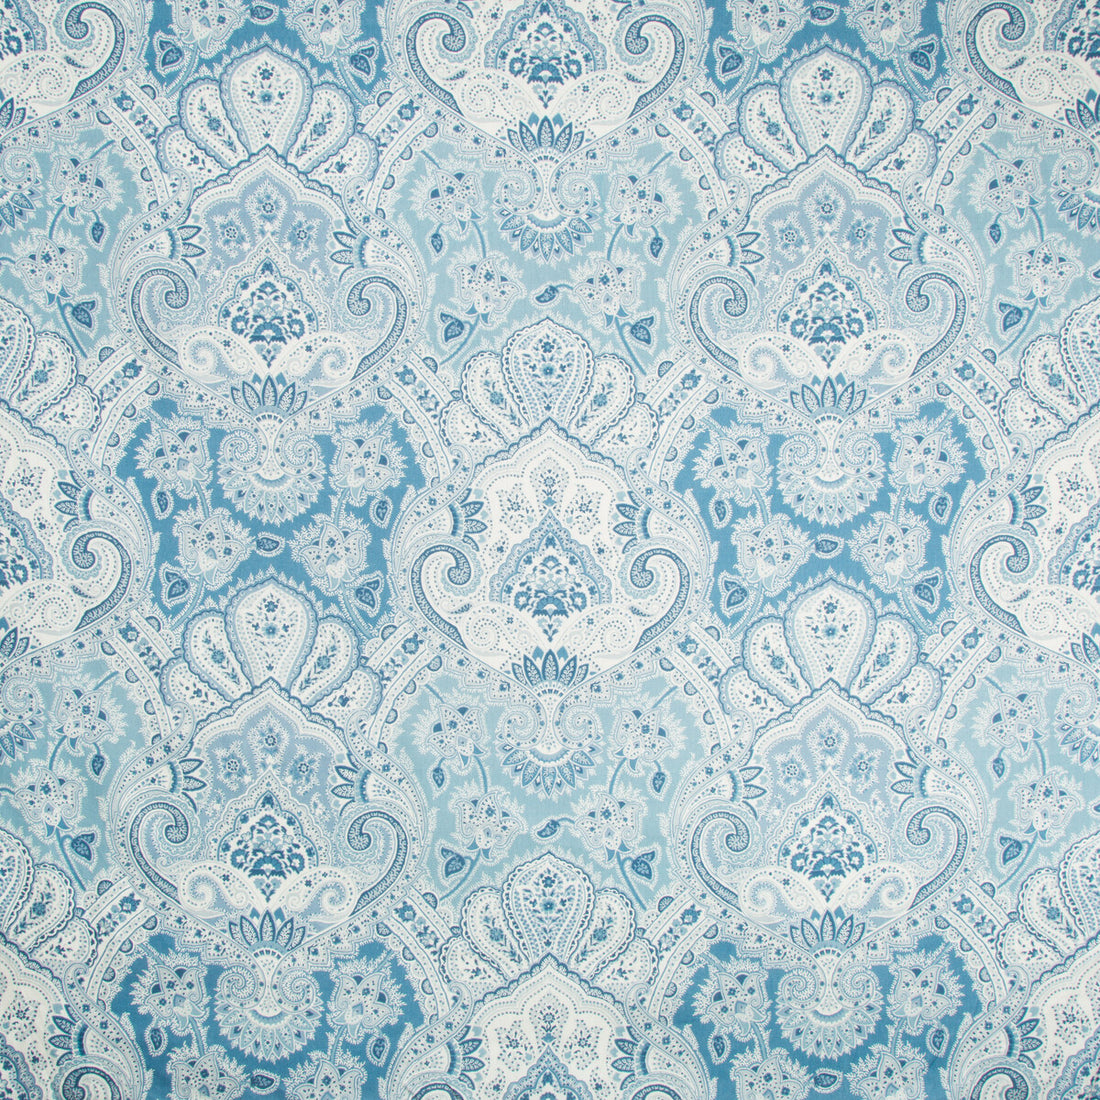 Echocyprus fabric in sapphire color - pattern ECHOCYPRUS.5.0 - by Kravet Basics in the Echo Greenwich collection